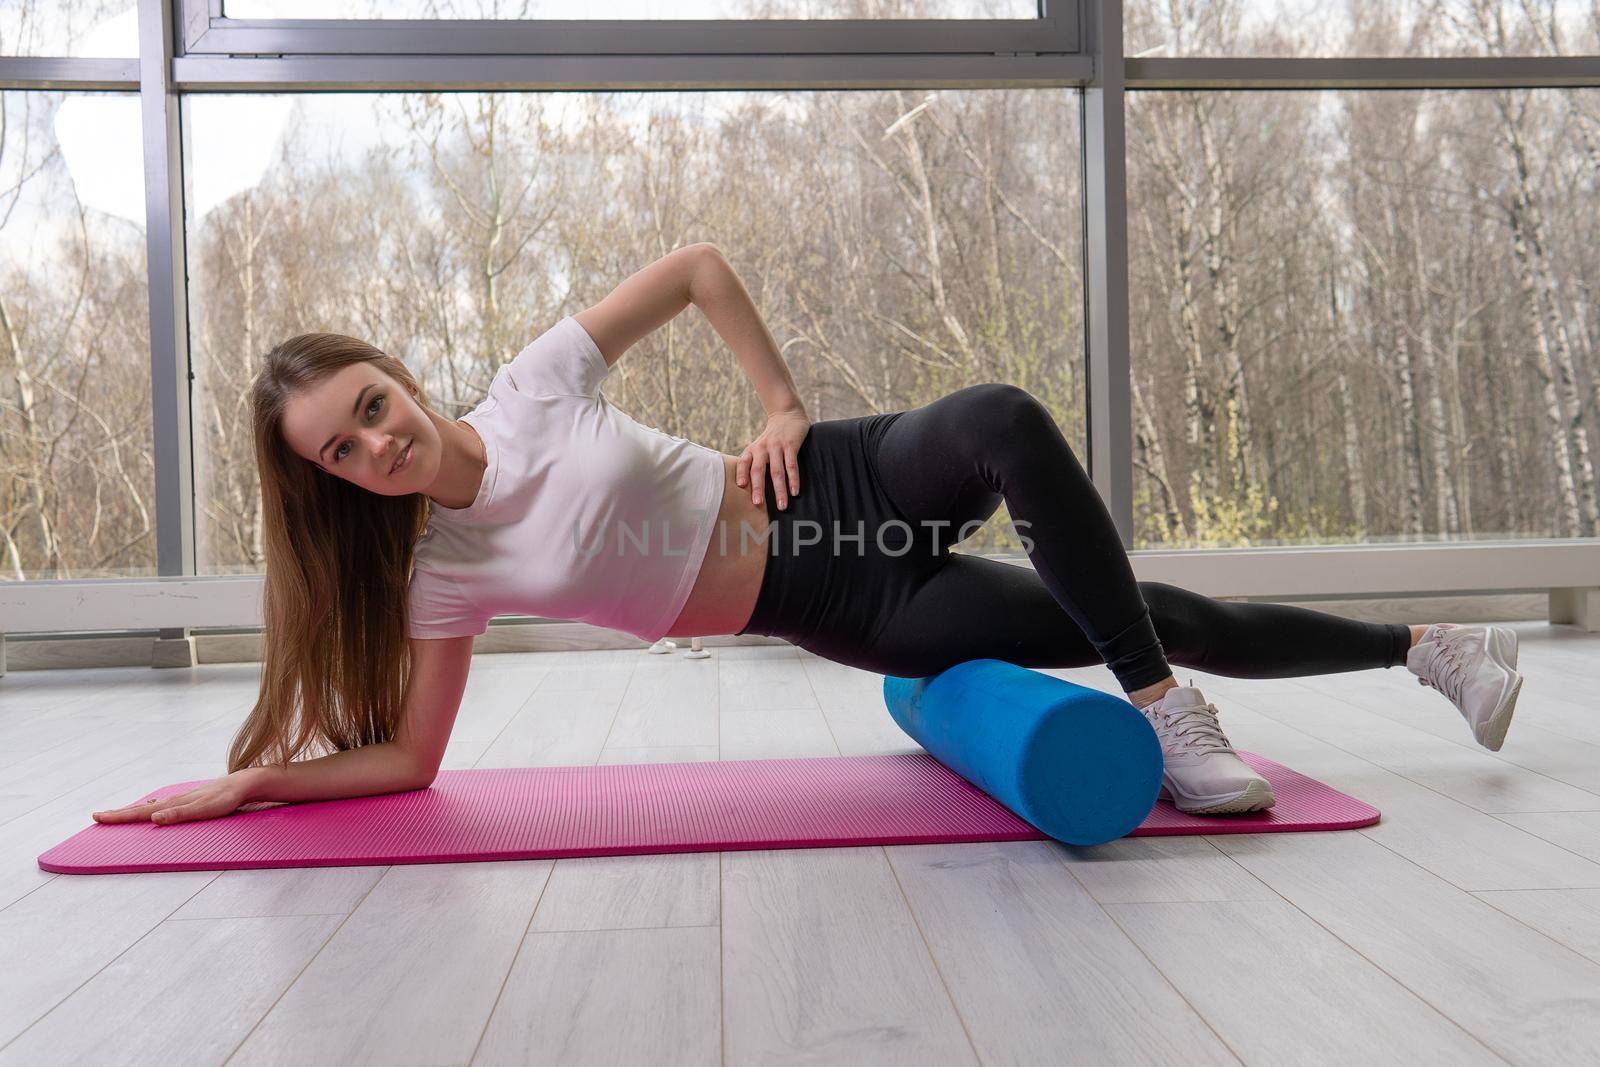 Girl the on lies mfr roller the fitness red mat window strength, for fit cheerful in female for healthy person, pilates stretch. Plank copy leg, practicing pose